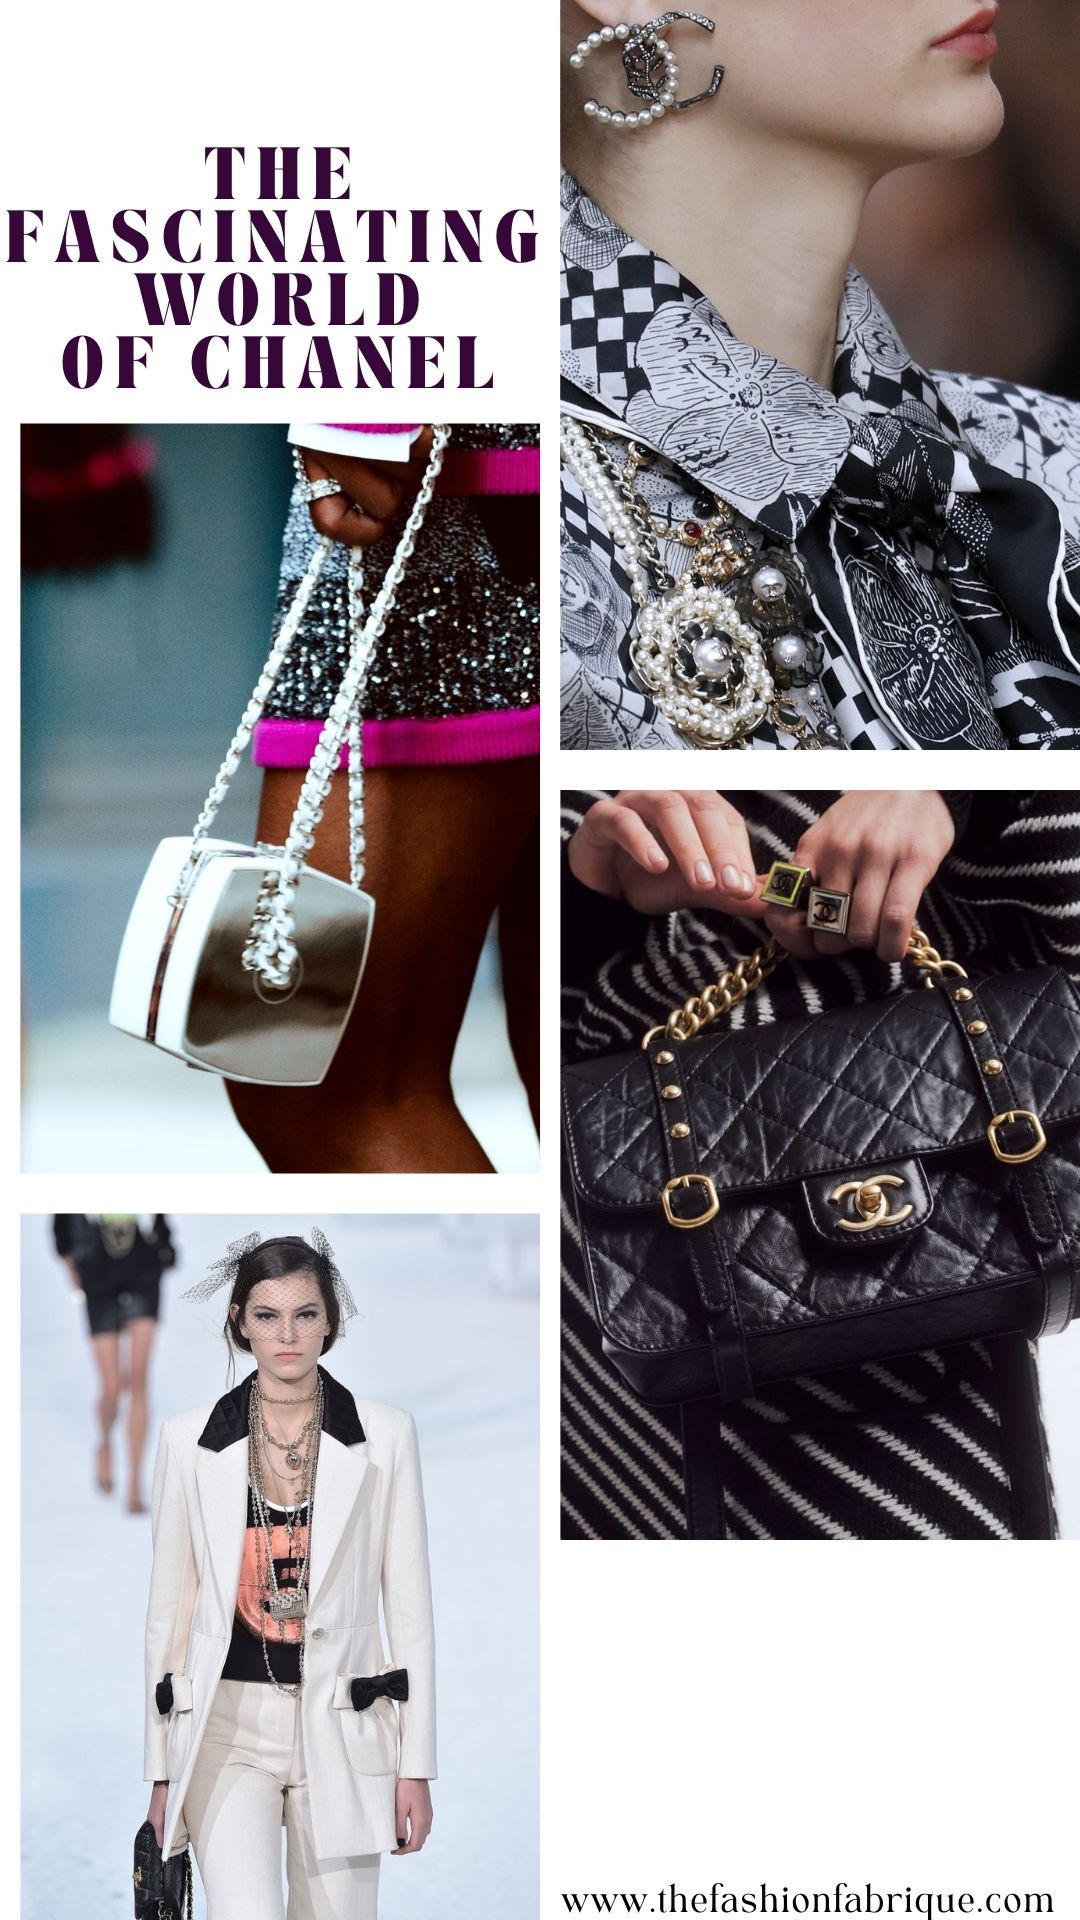 Chanel the Brand - All You Must Know About the Chanel Brand